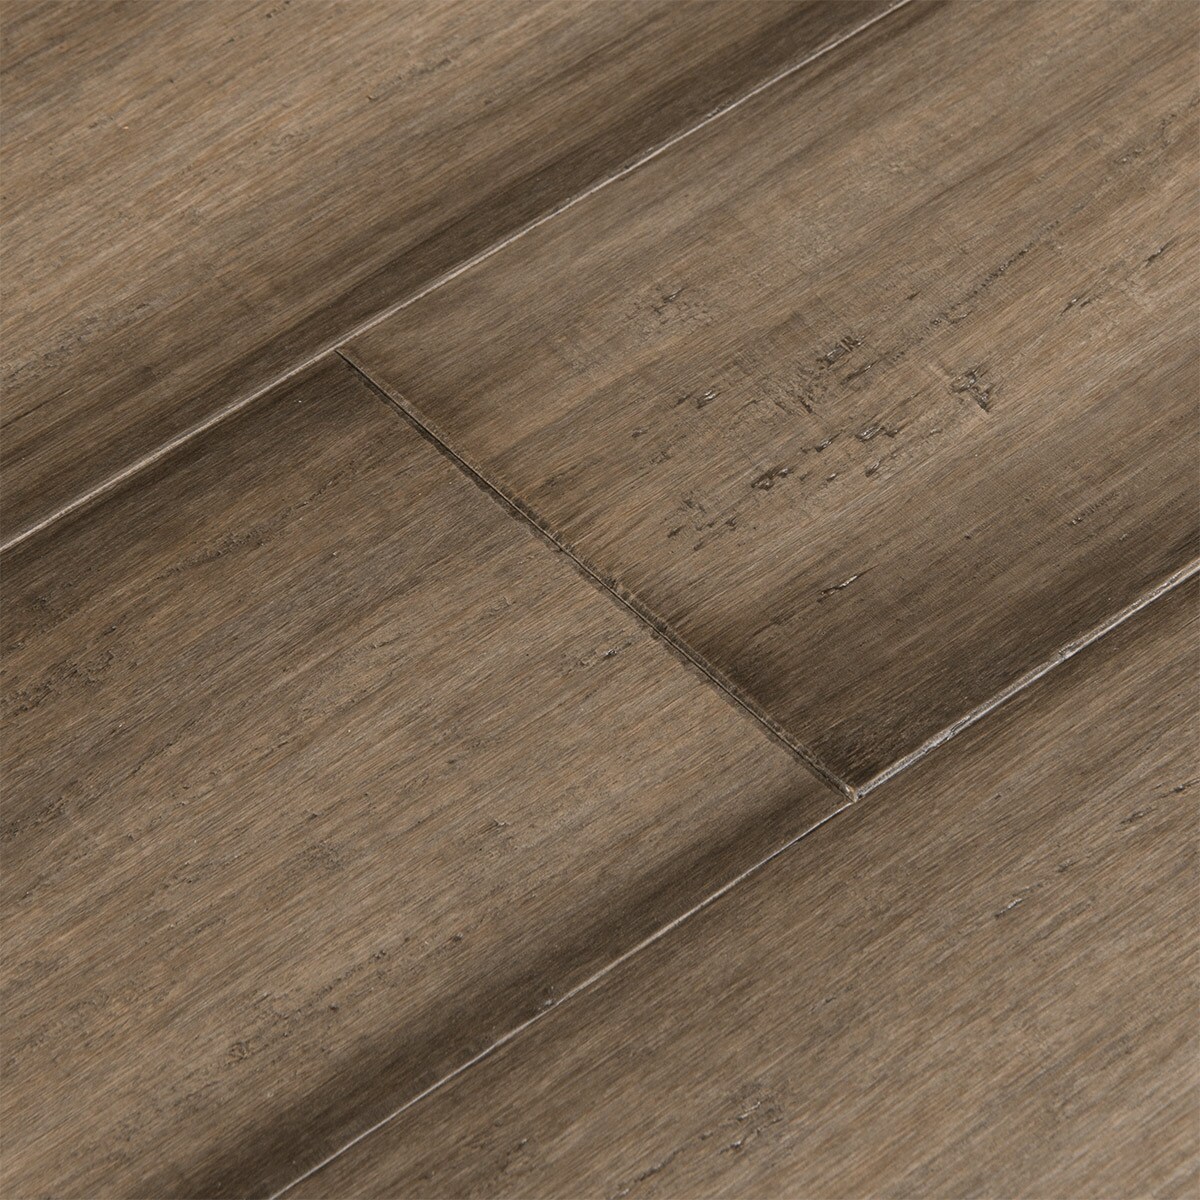 Cali Bamboo Fossilized 5 37 In Napa Bamboo Solid Hardwood Flooring 26 89 Sq Ft In The Hardwood Flooring Department At Lowes Com